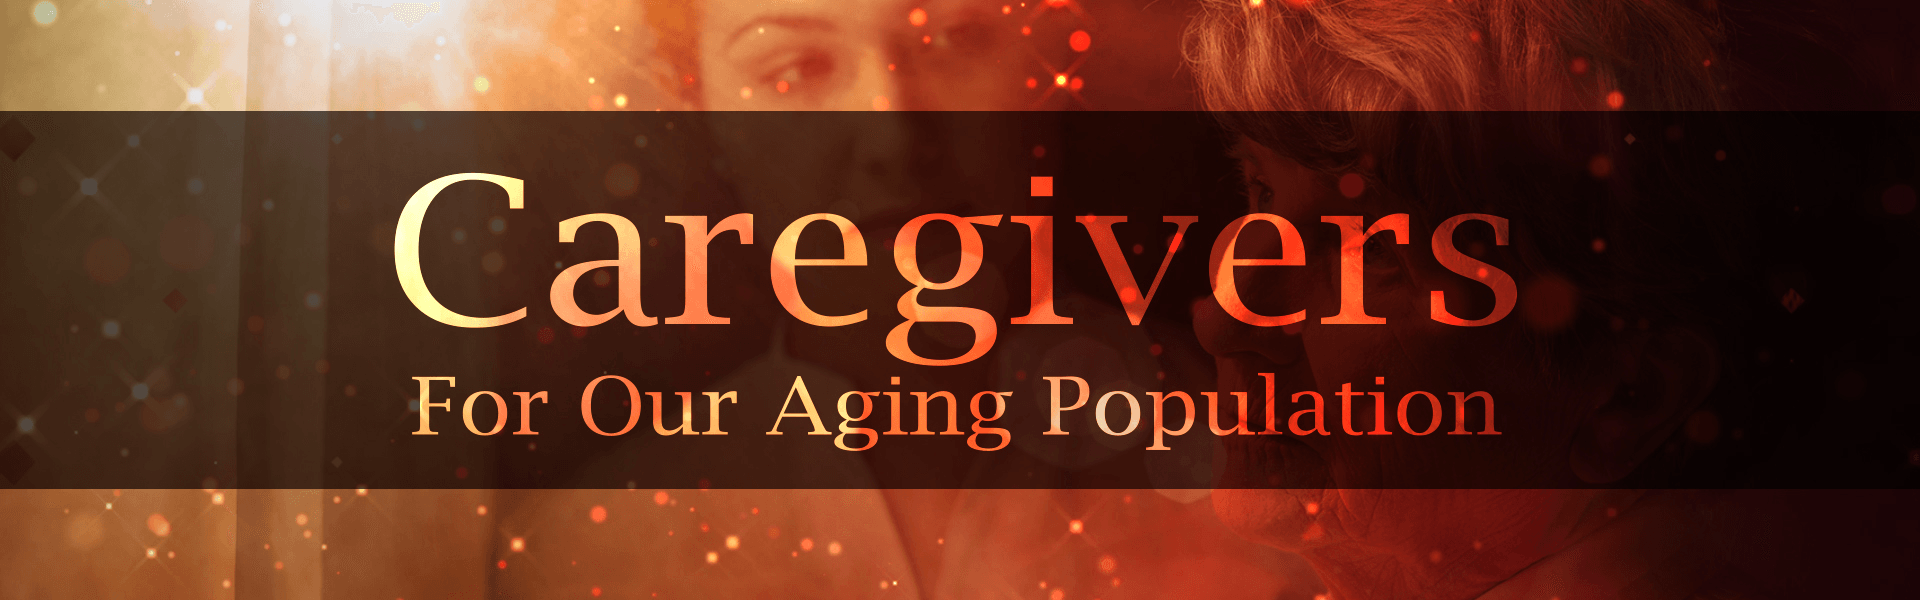 Caregivers: For Our Aging Population